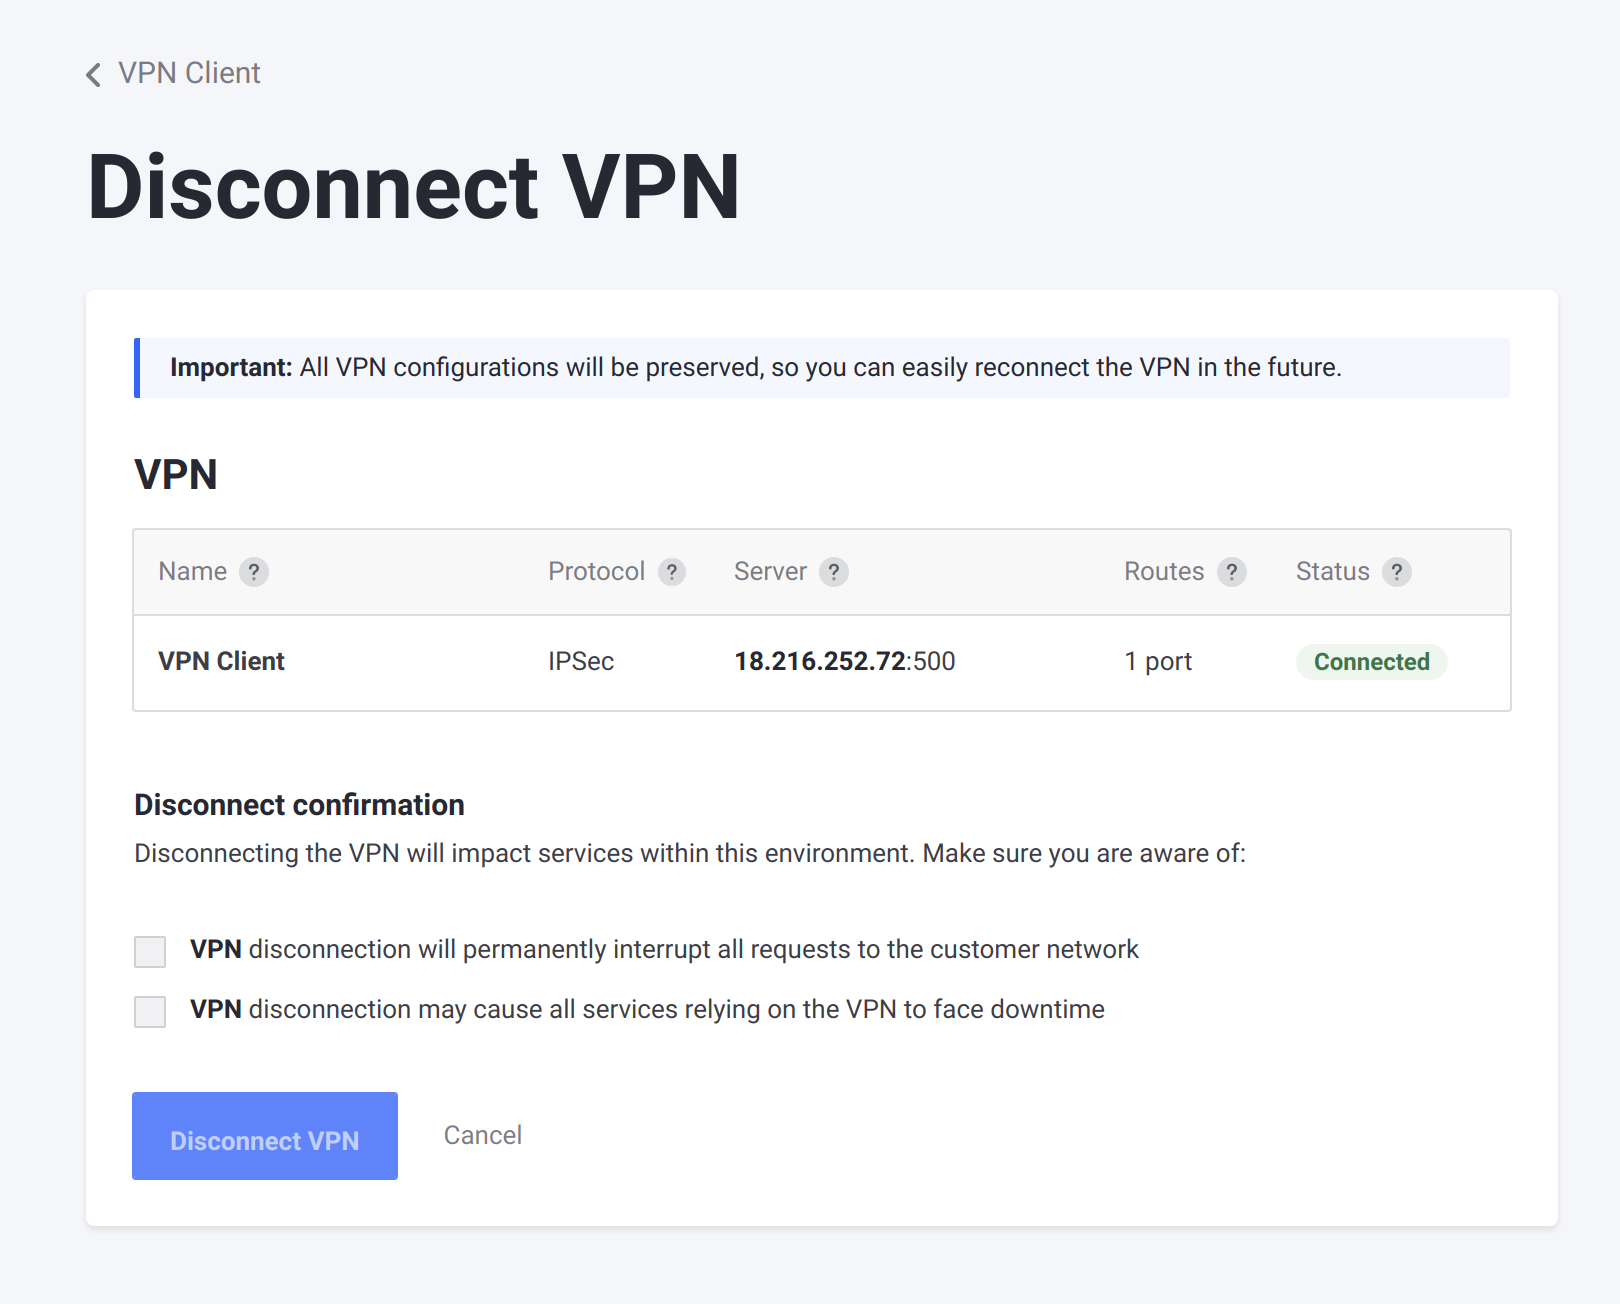 The Disconnect VPN page asks you to confirm the impact of disconnecting before proceeding.